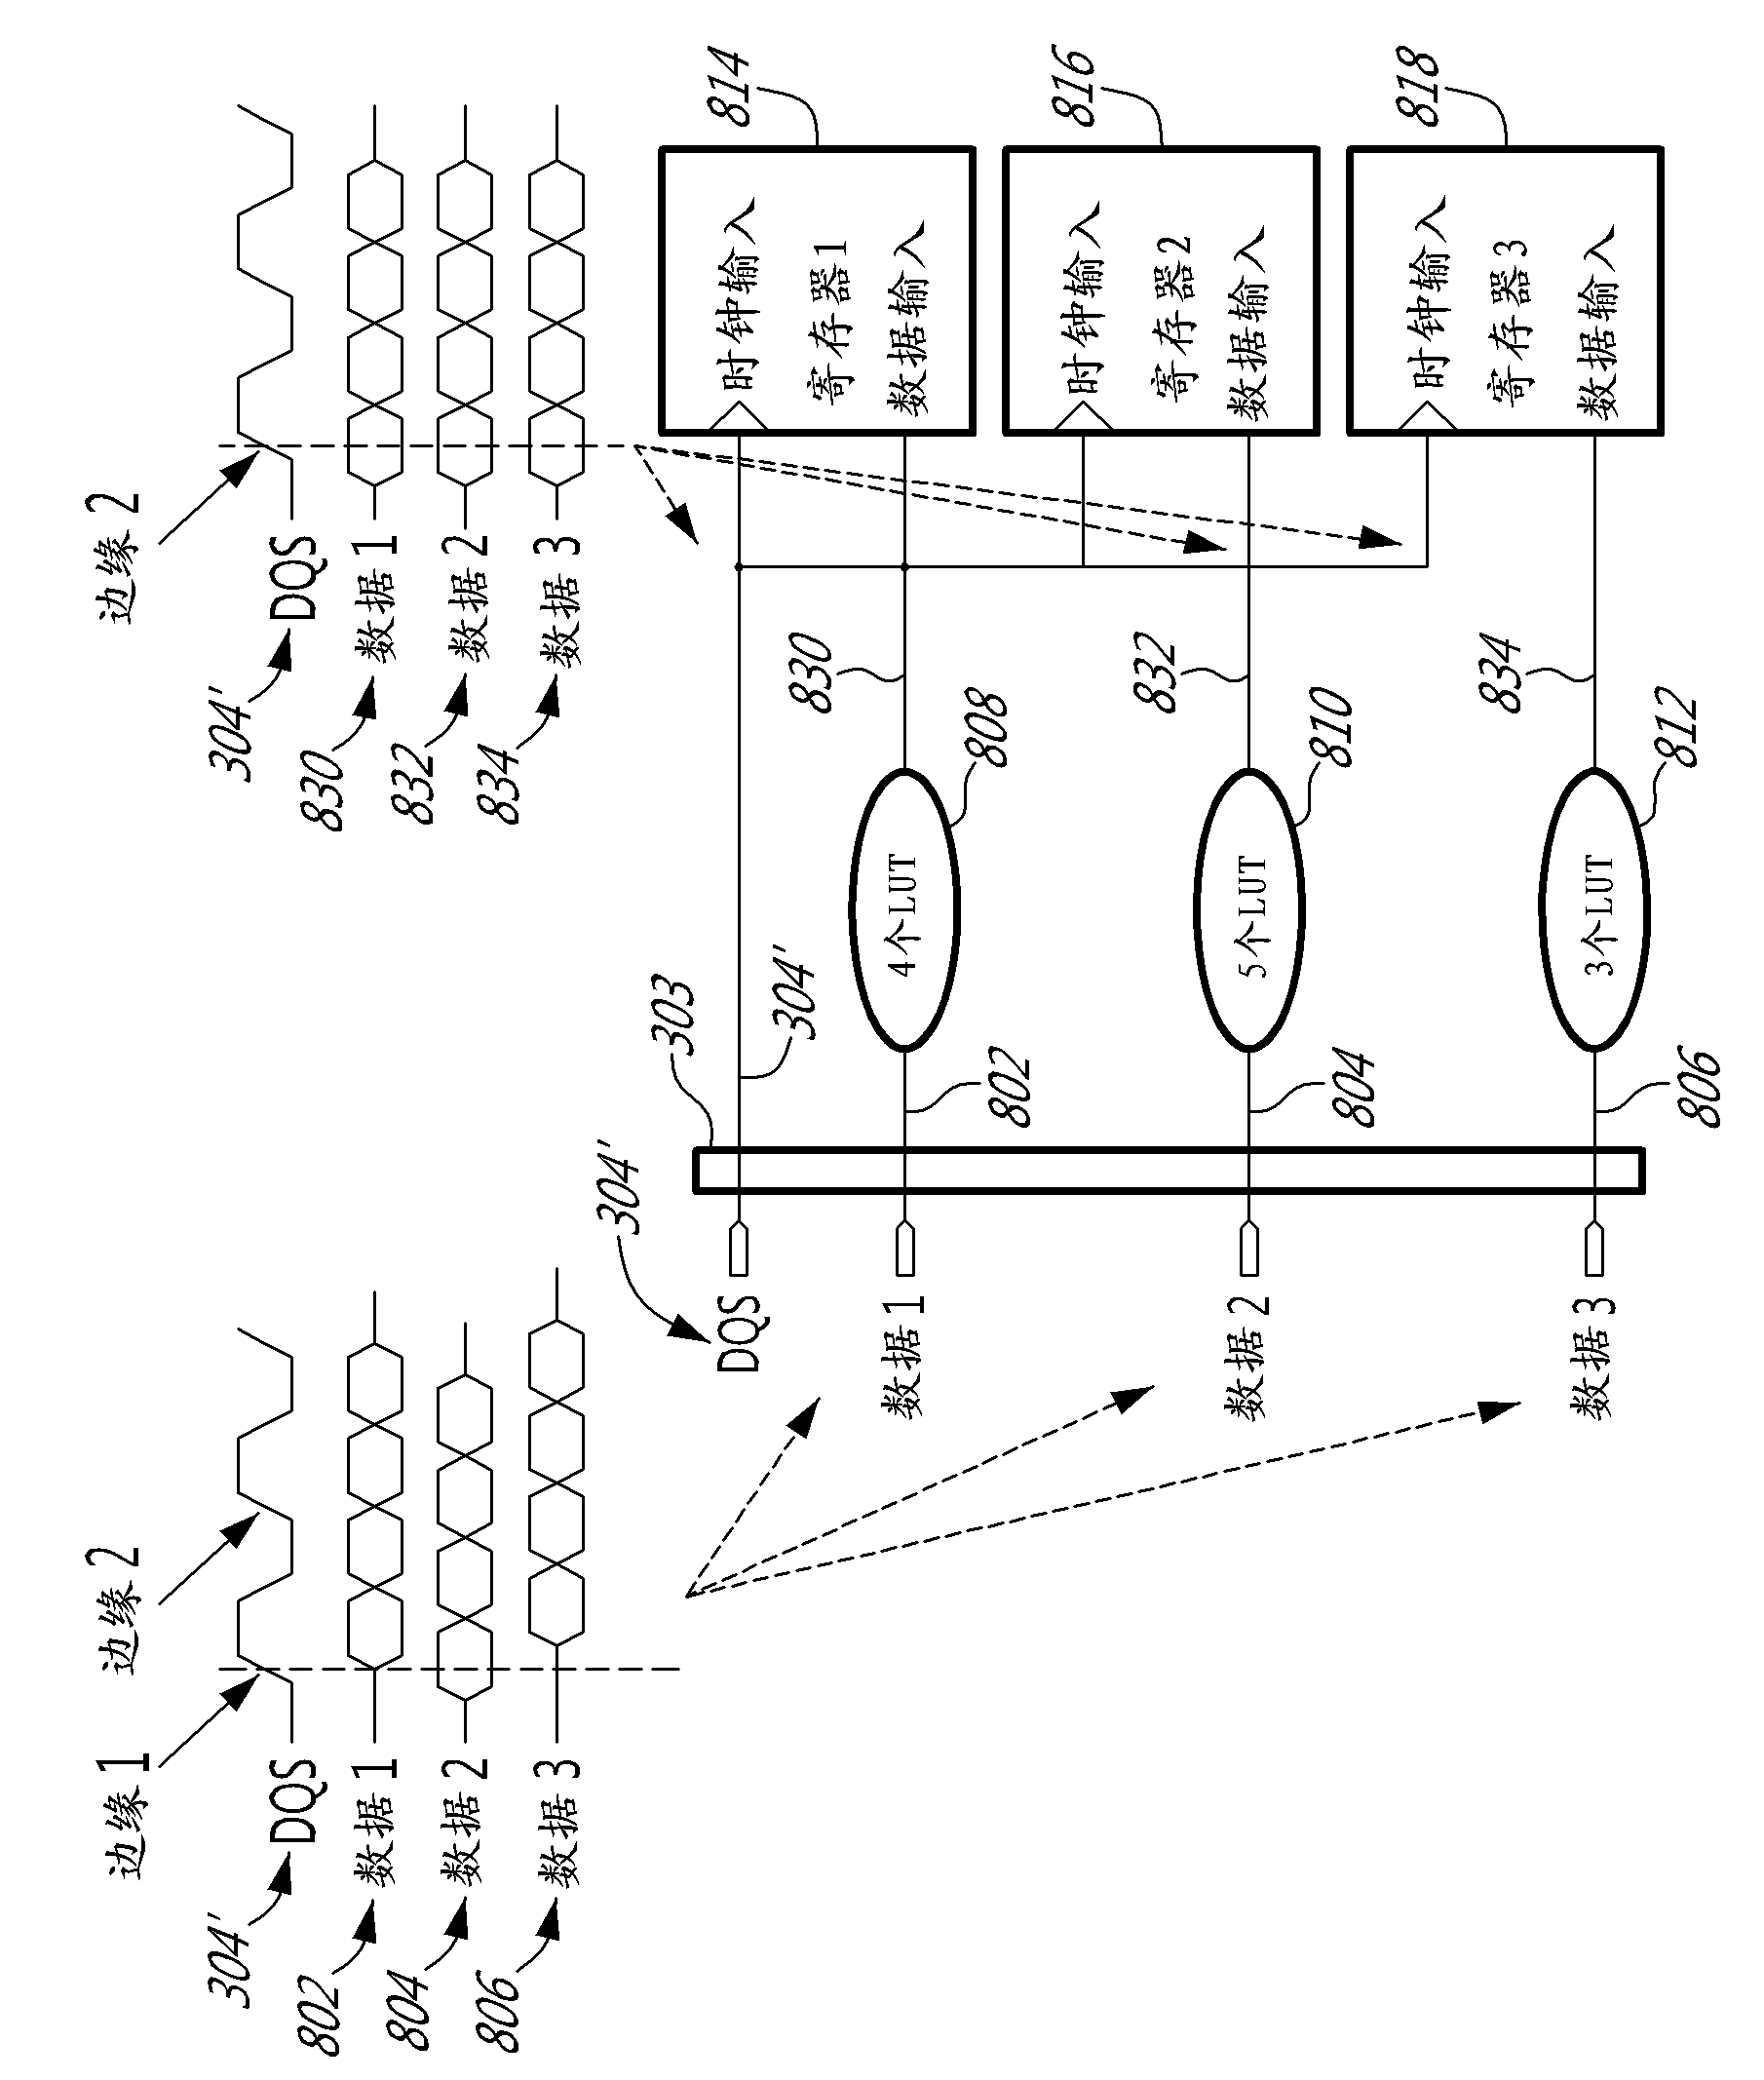 Look-up tables for delay circuitry in field programmable gate array (fpga) chipsets